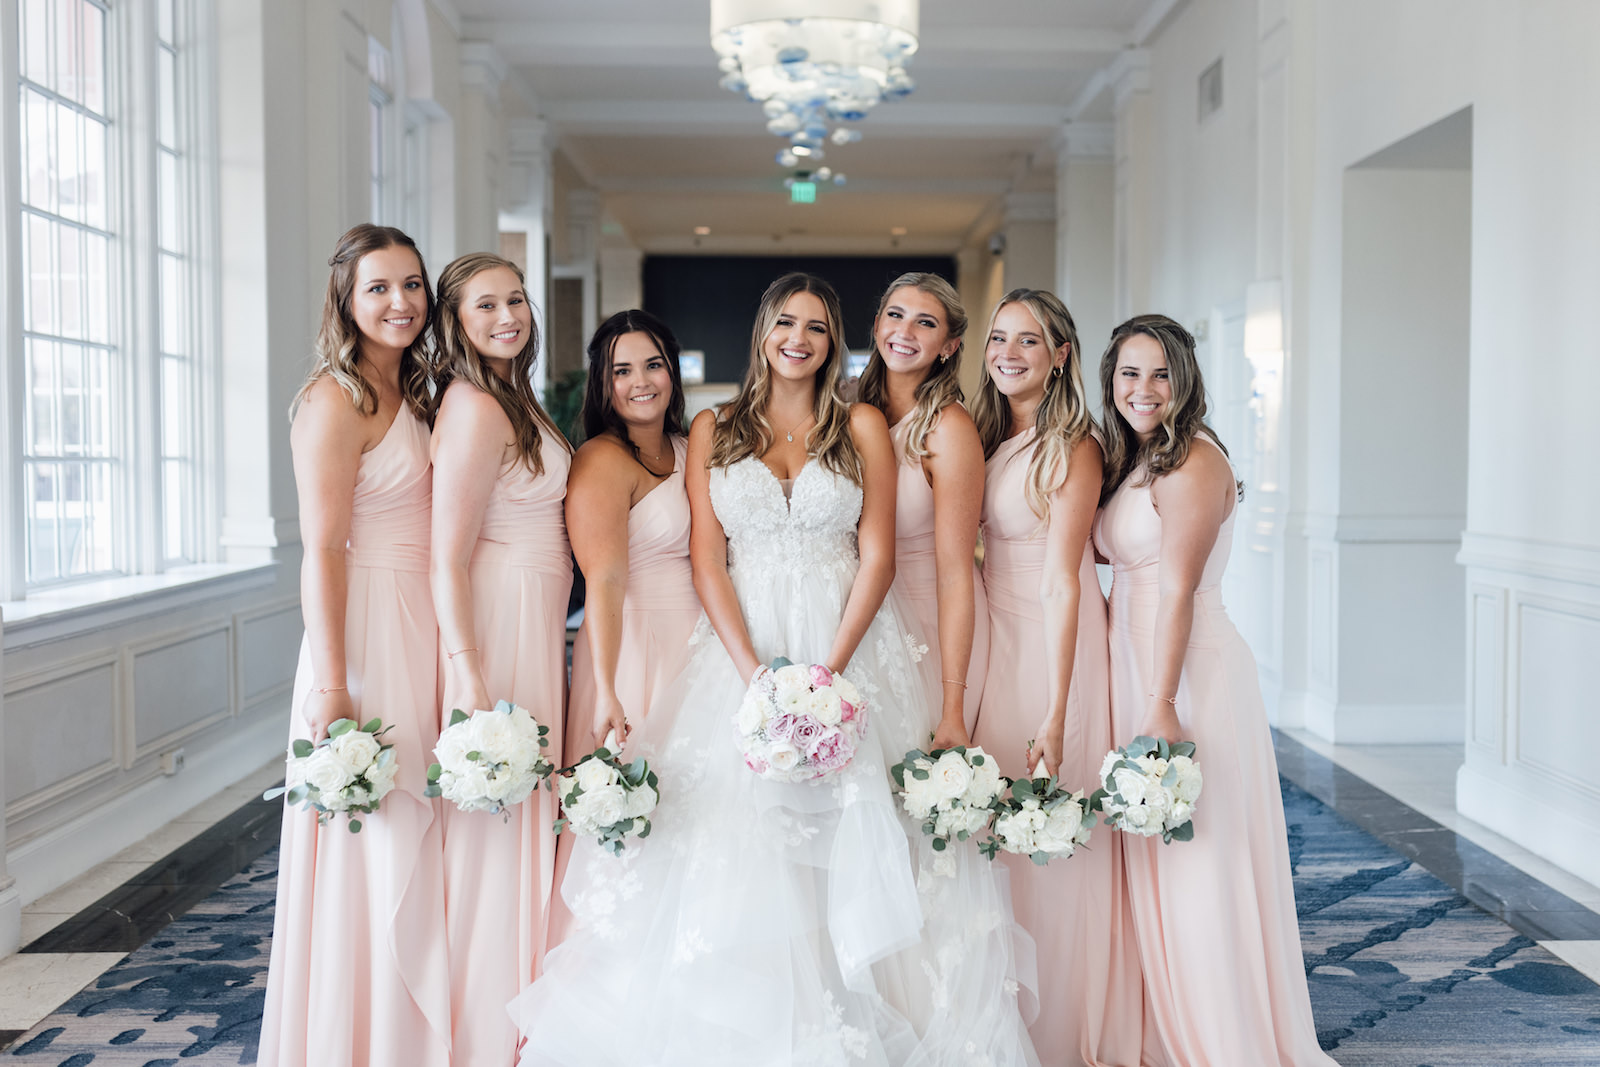 Bride and Bridesmaids in Blush Long Bridesmaids Dresses Wedding Portrait with White and Greenery Bouquets | Bruce Wayne Florals